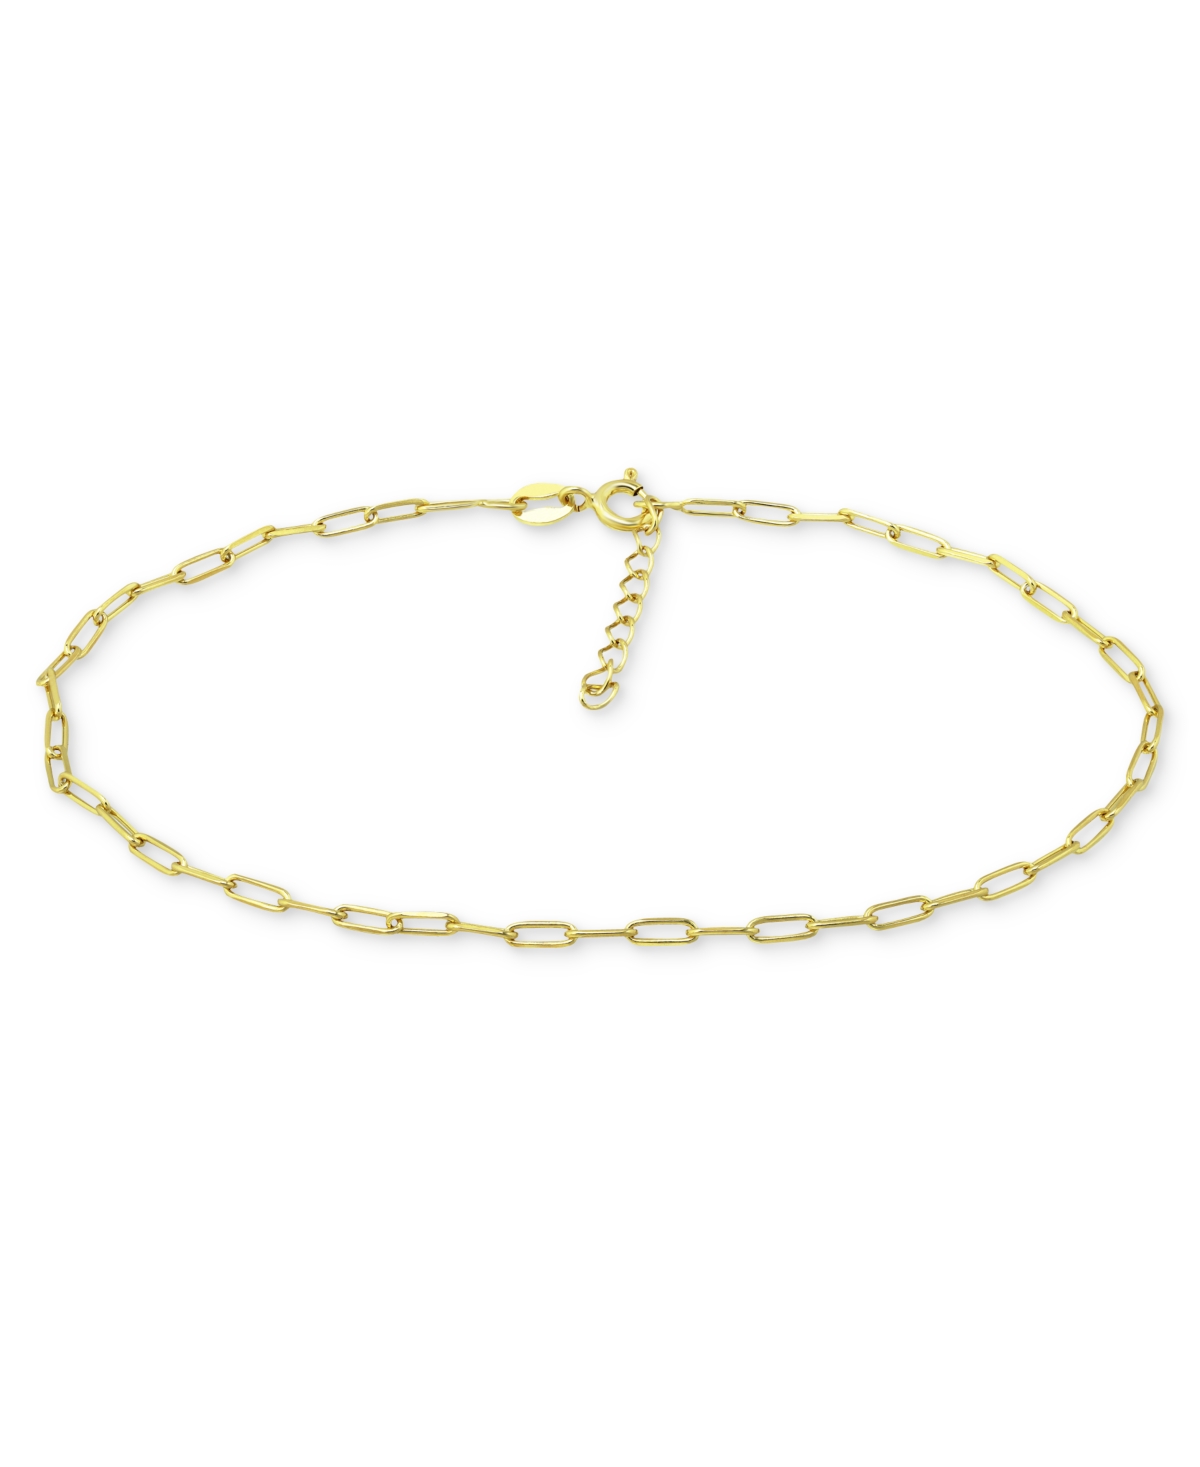 Giani Bernini Paperclip Link Ankle Bracelet in Sterling Silver and 18k Over Silver, Created for Macy's - Gold Over Silver